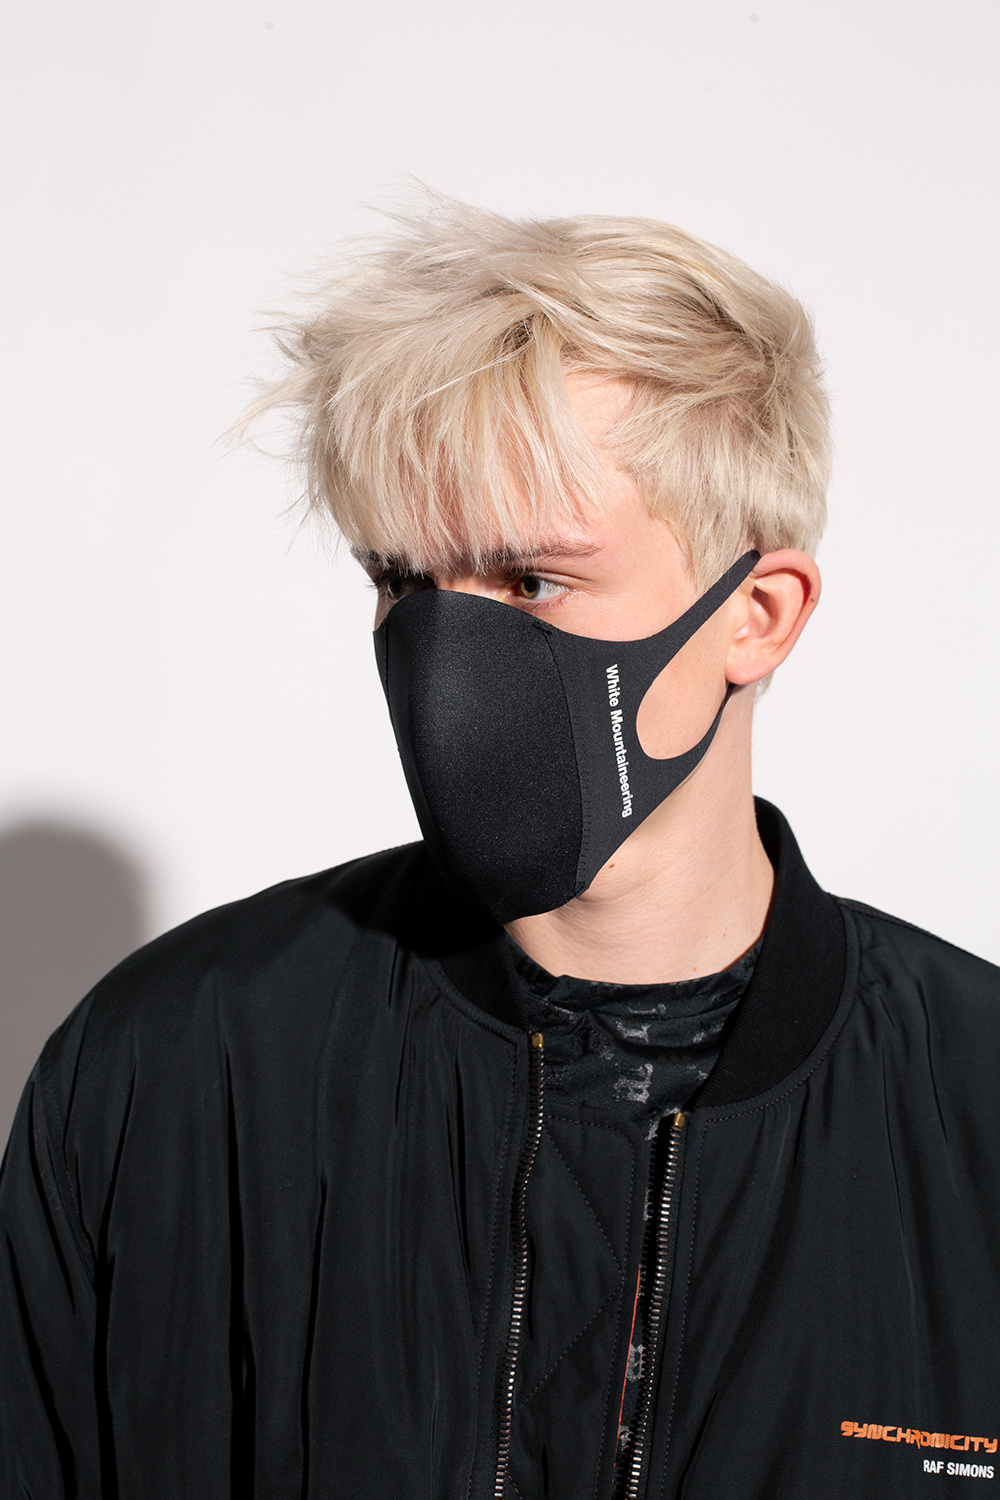 White Mountaineering Mask with logo